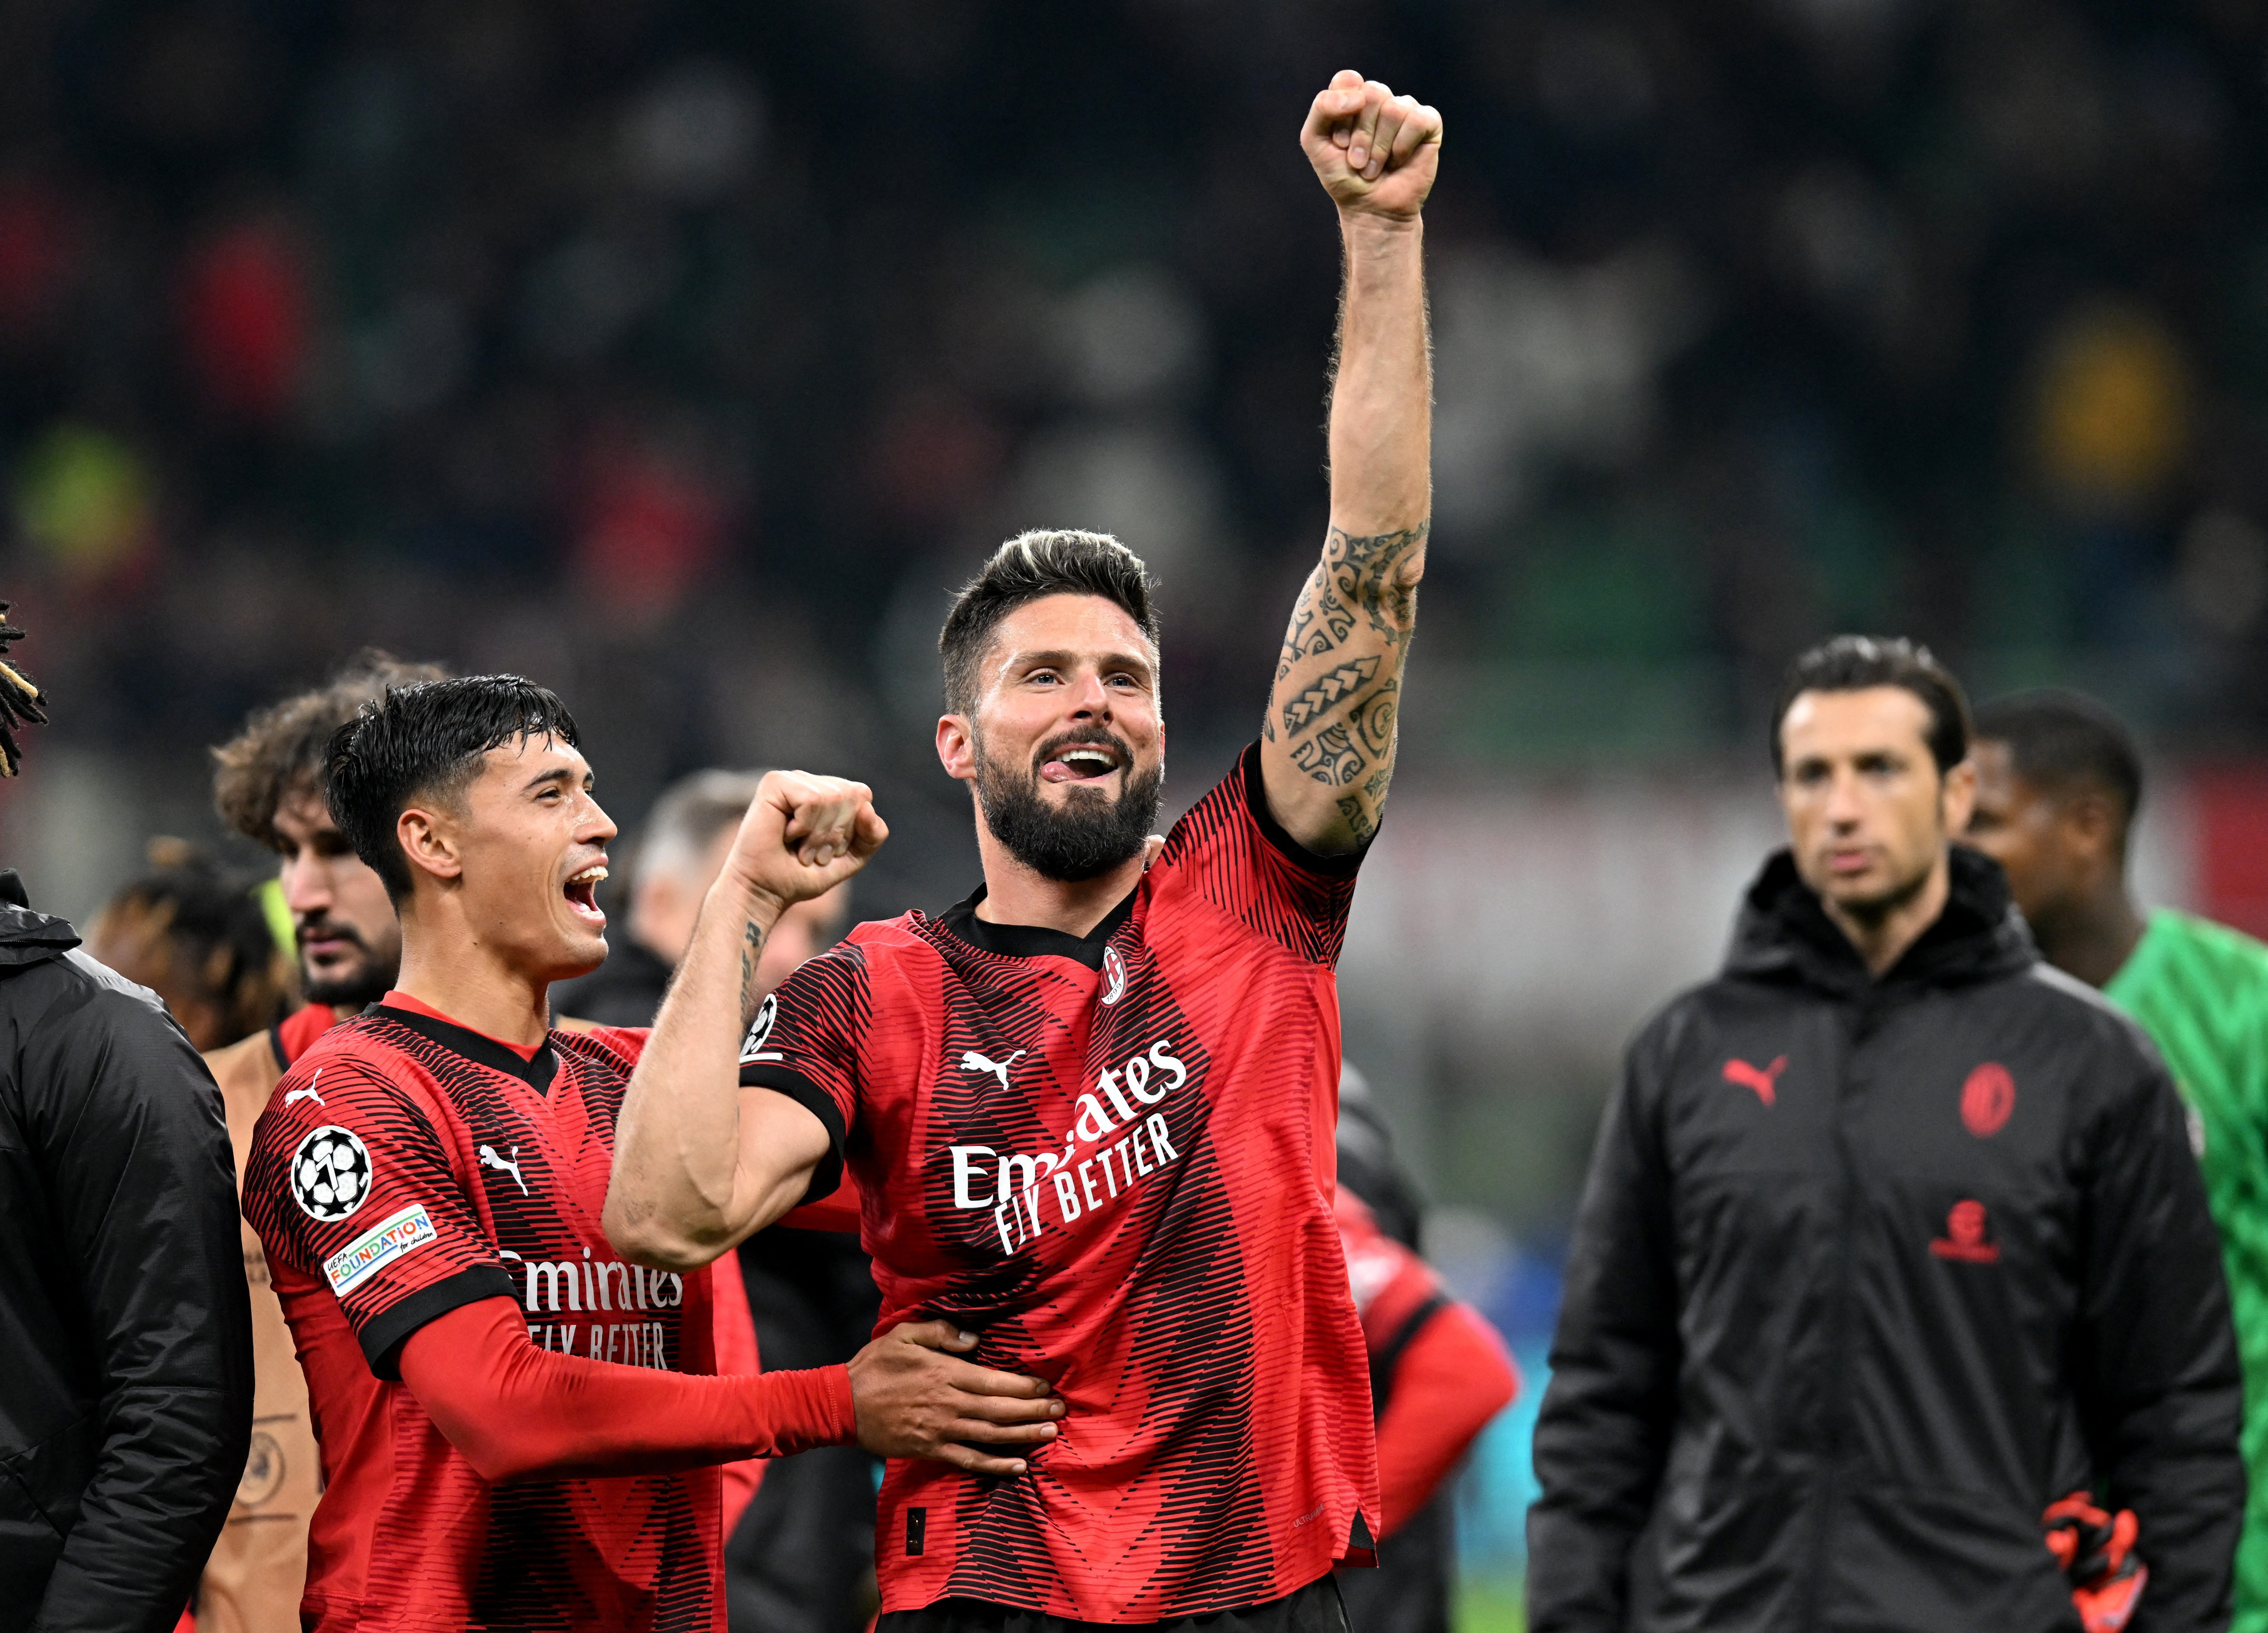 AC Milan scores its first goals in CL group to beat PSG